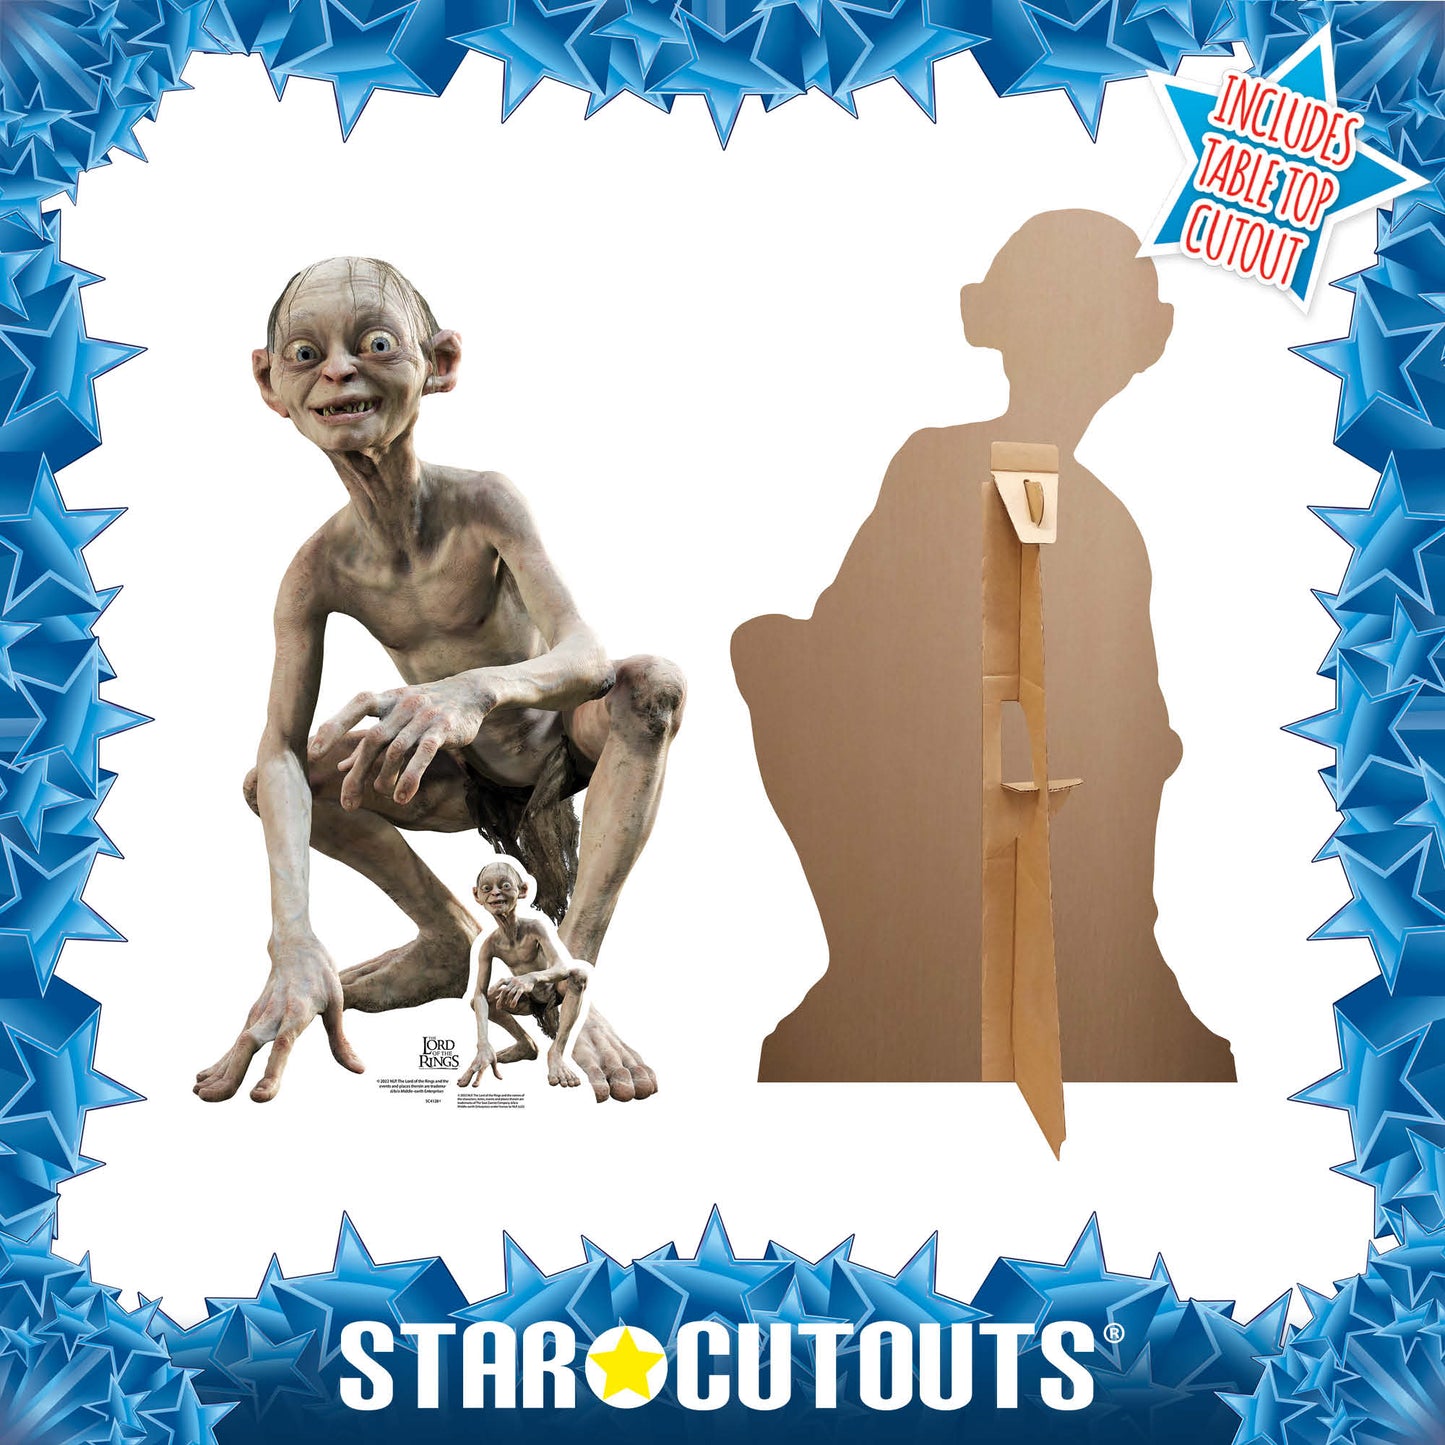 SC4128 Gollum The Lord of the Rings Cardboard Cut Out Height 88cm